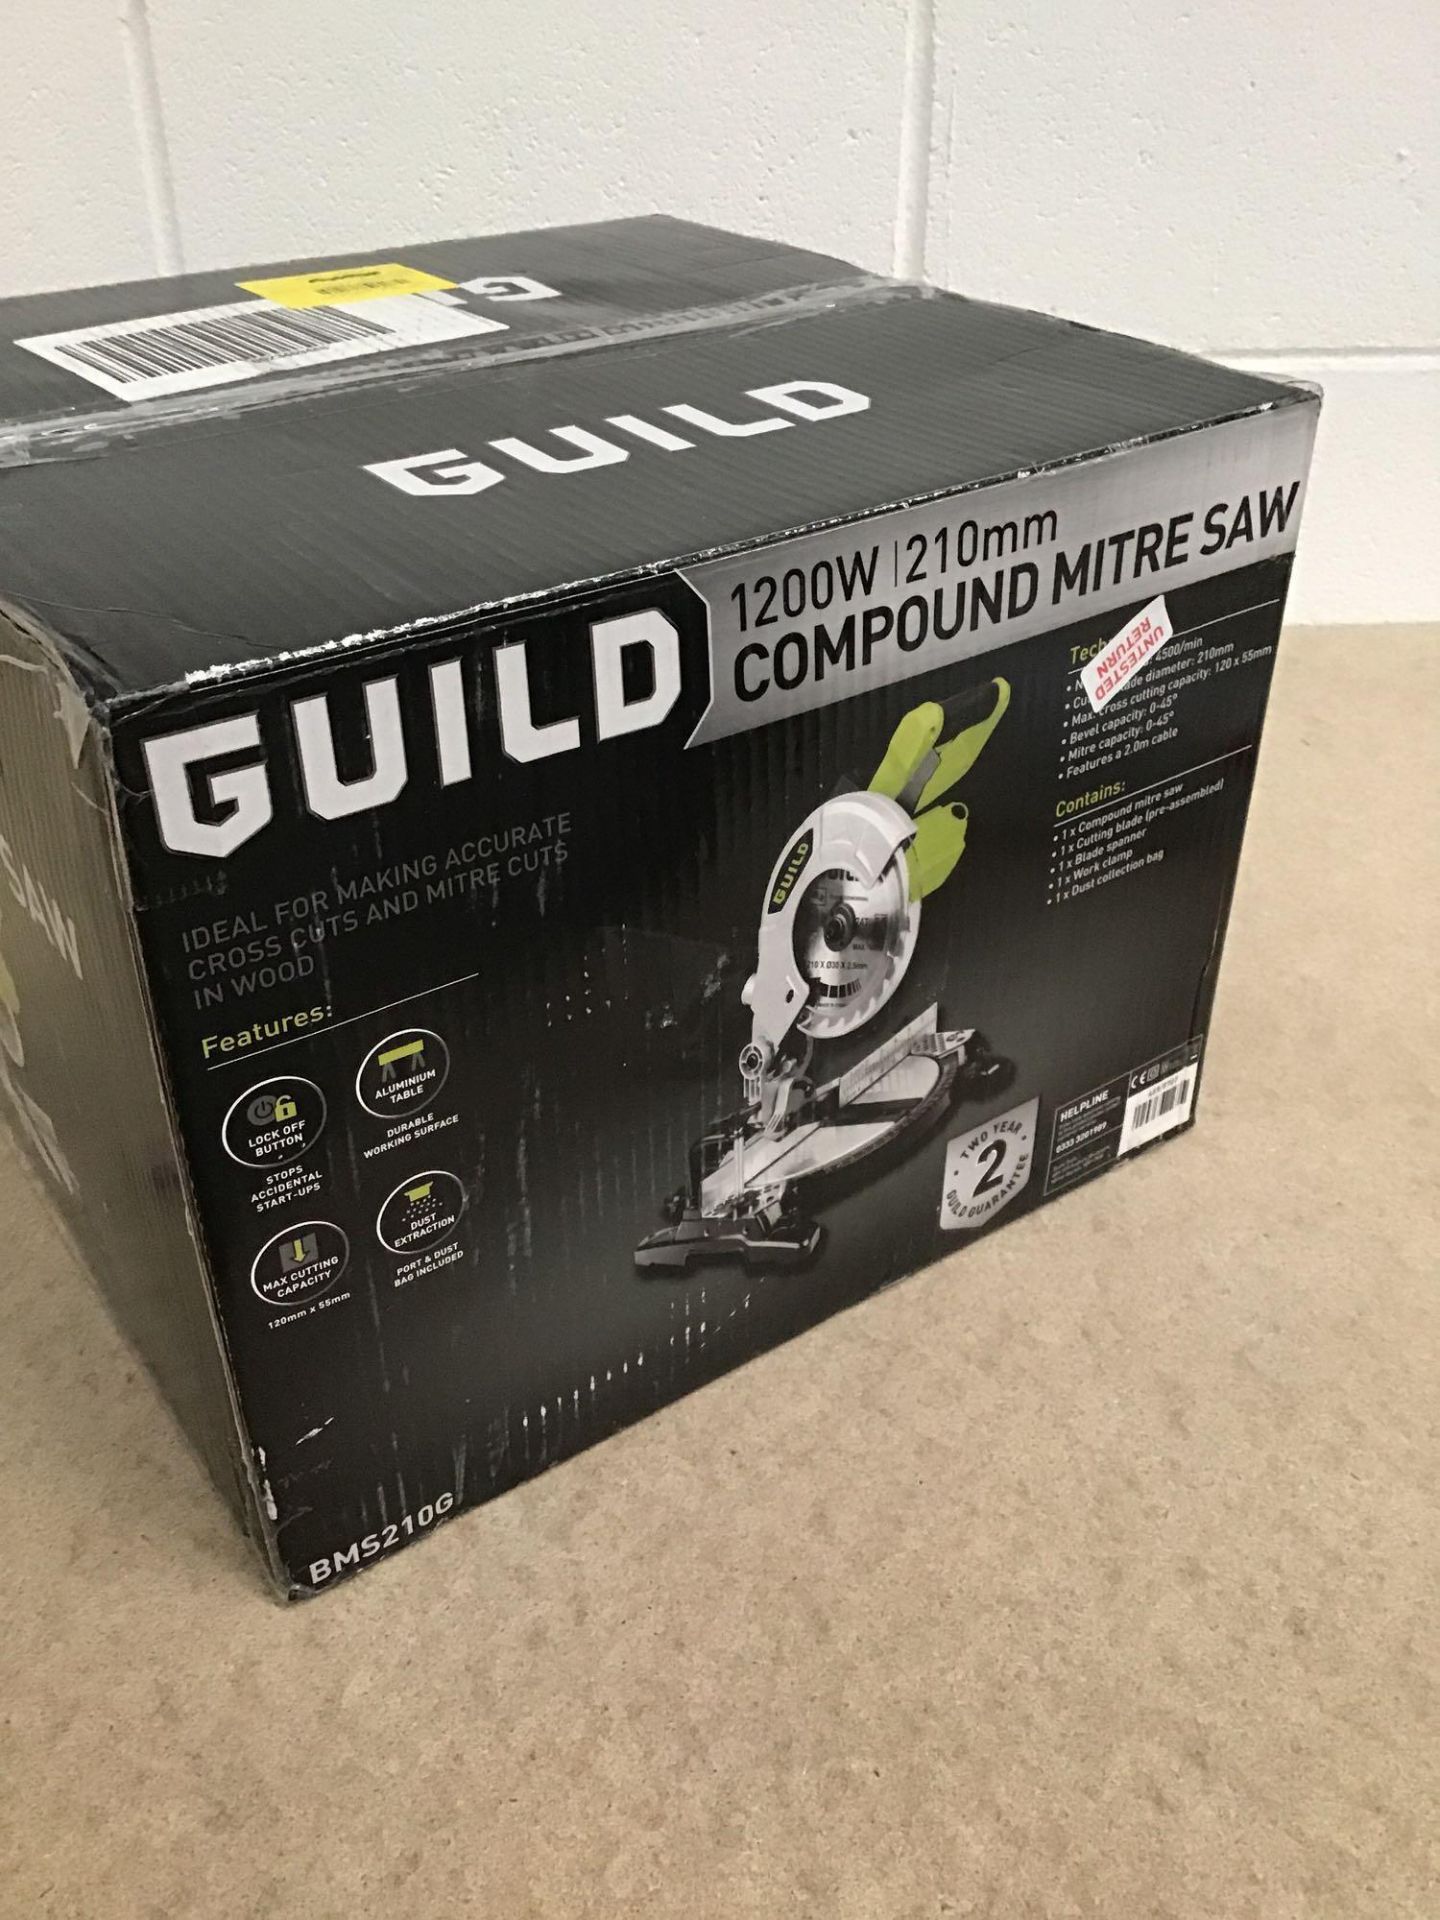 Guild 210mm Compound Mitre Saw - 1200W 459/8707 £70.00 RRP - Image 3 of 5